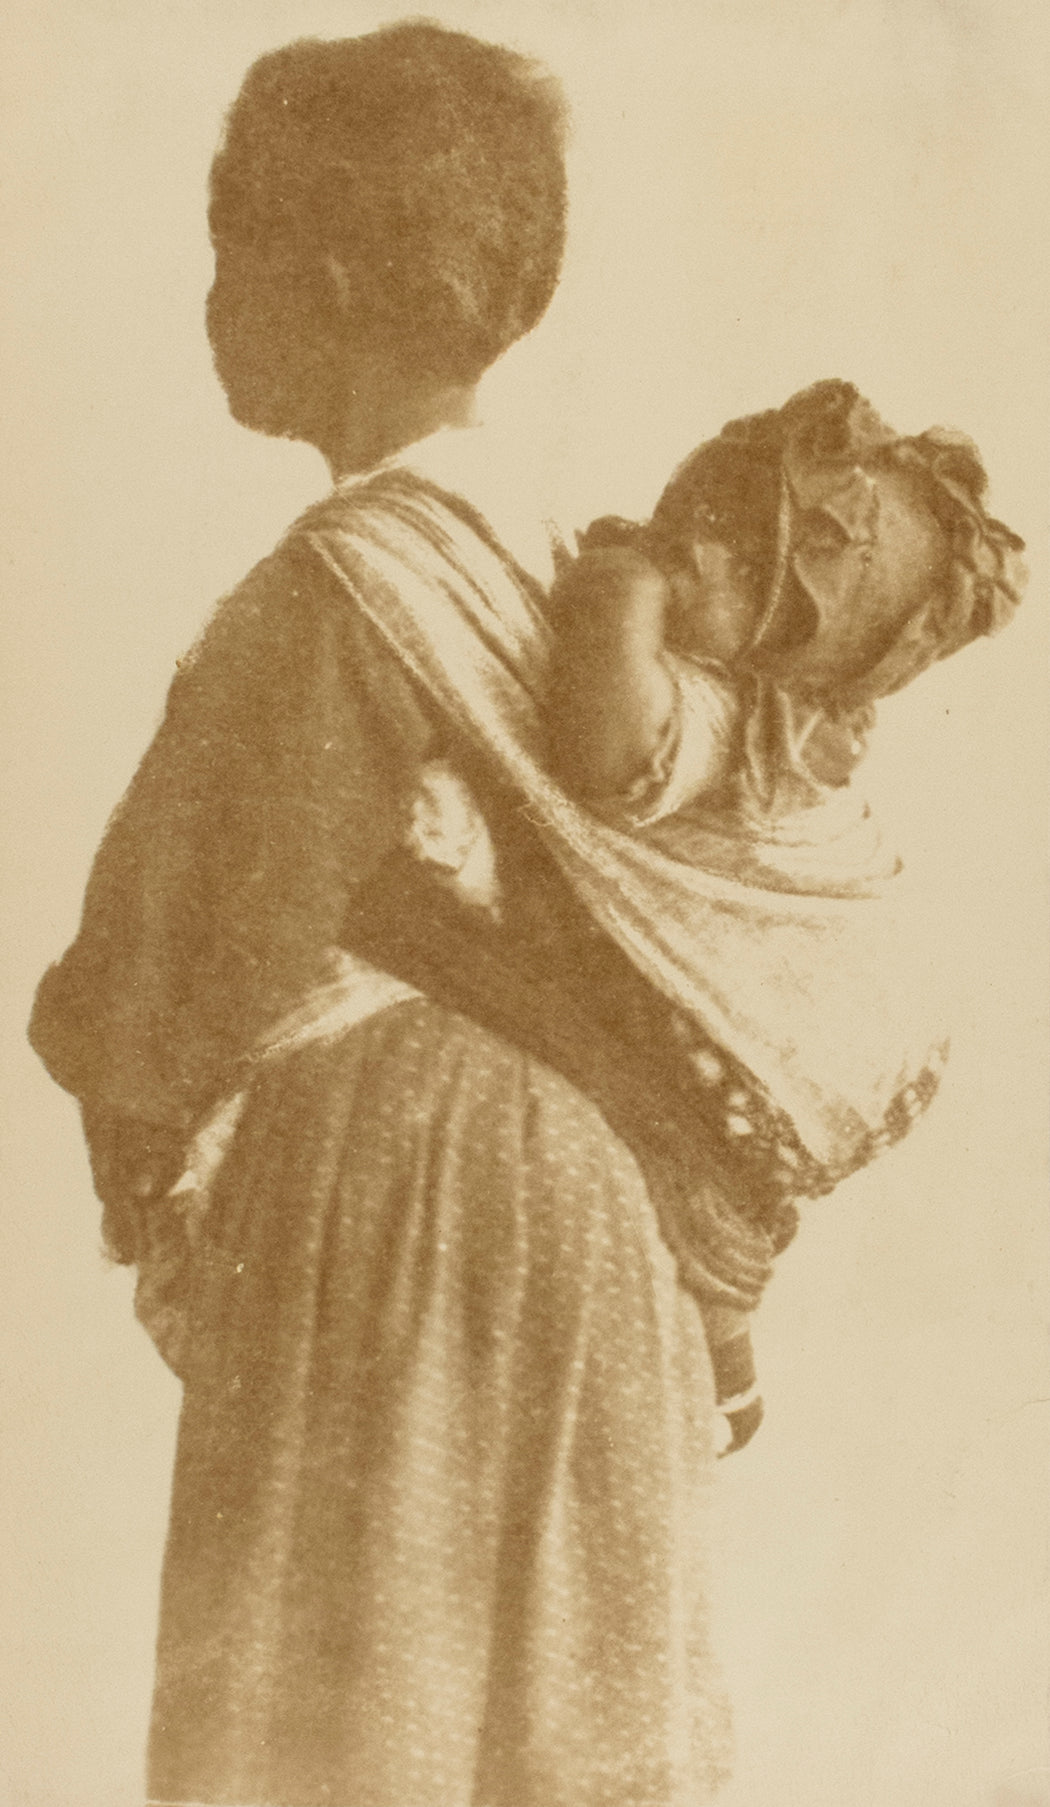 Untitled [Woman with baby in a sling]